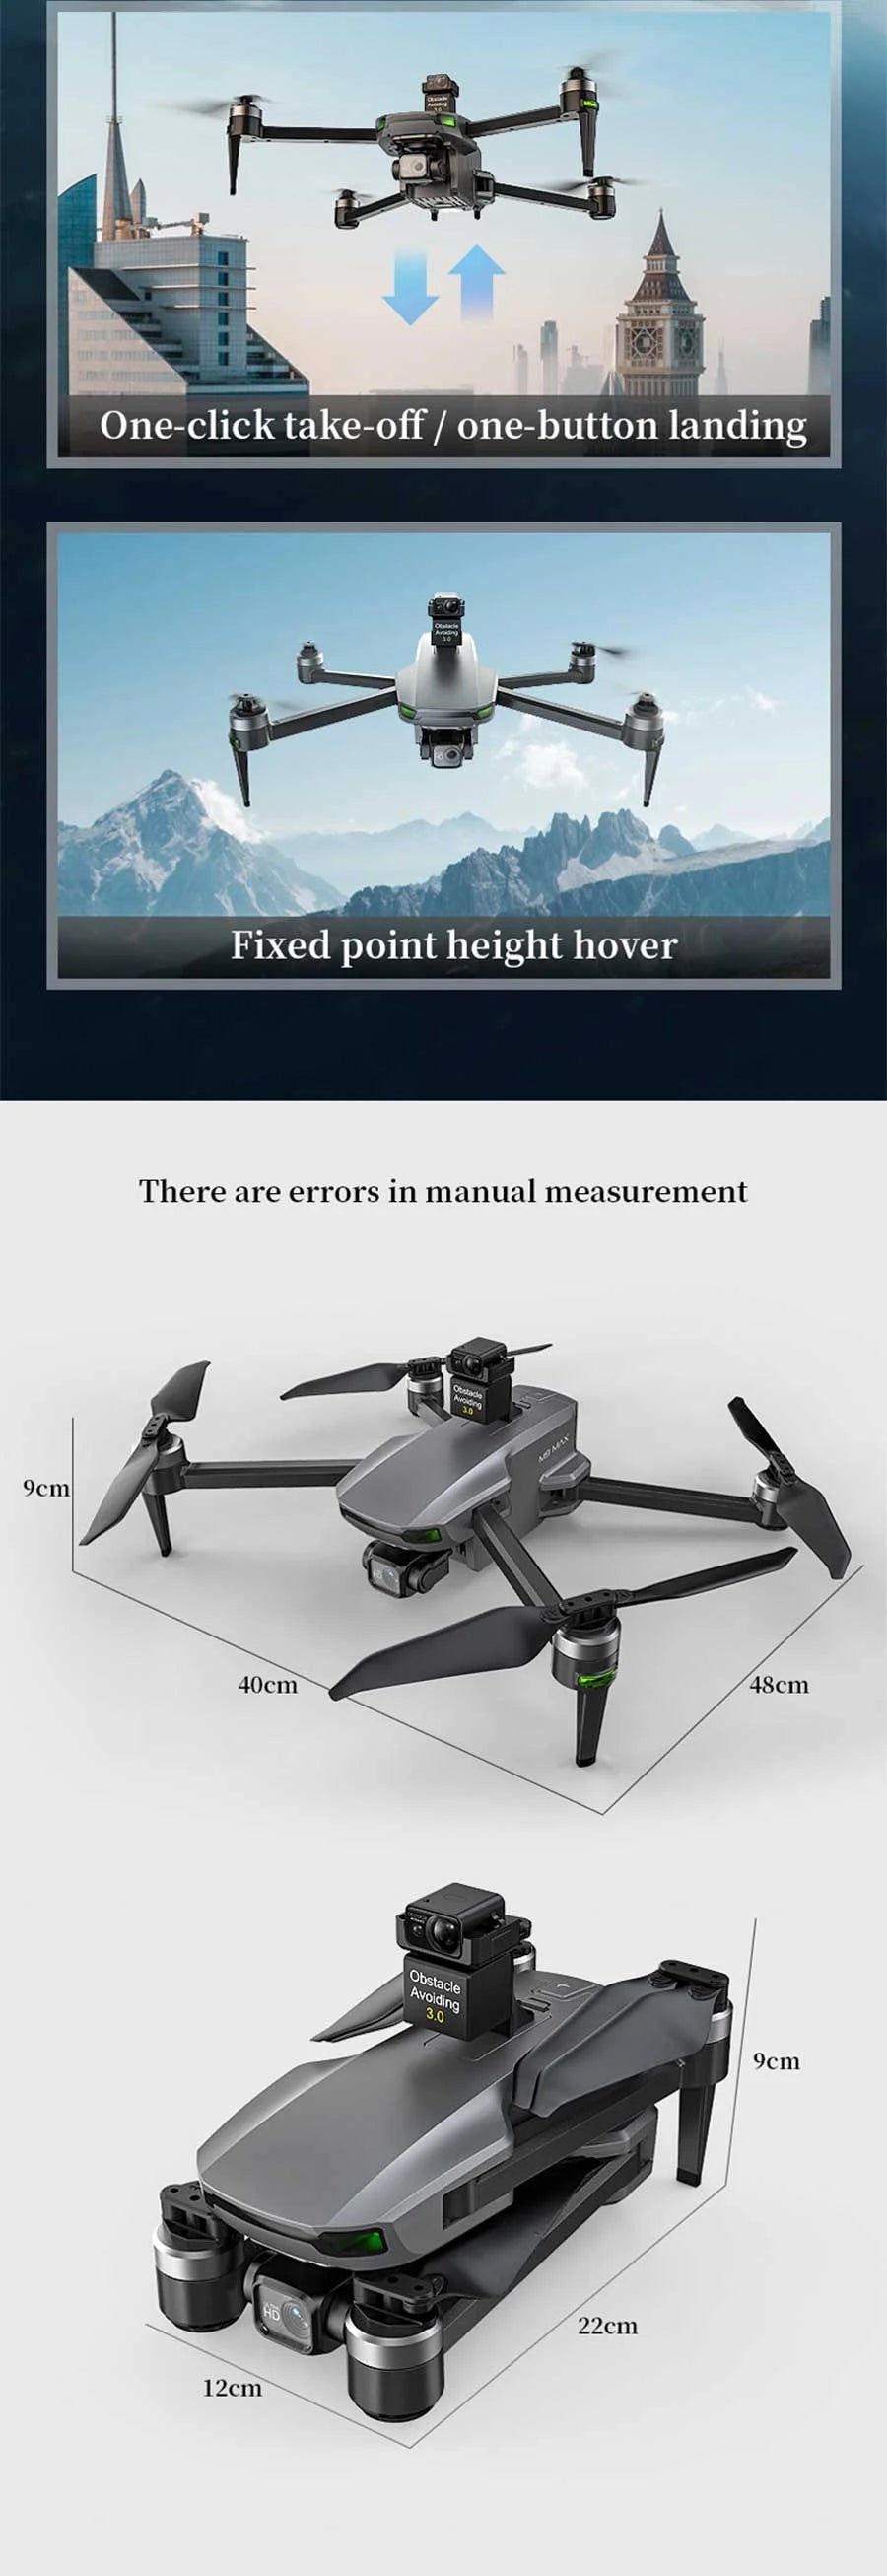 XMR/C M9 MAX Drone, one-click take-off one-button landing Fixed height hover There are errors in manual